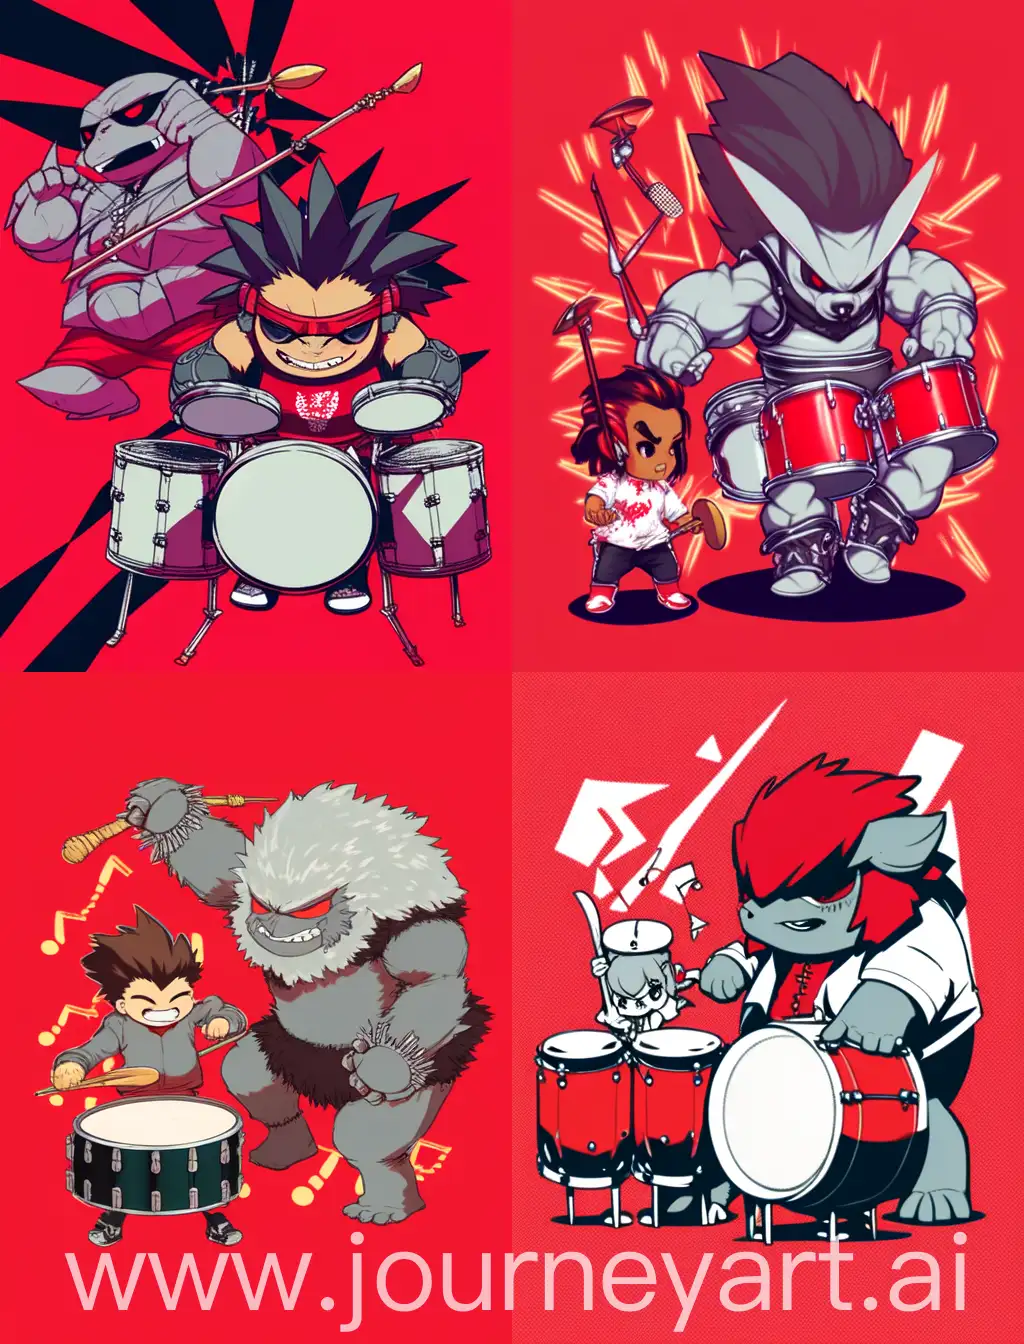 chibi gorilla and anime guy playing drums, with red solid background, 